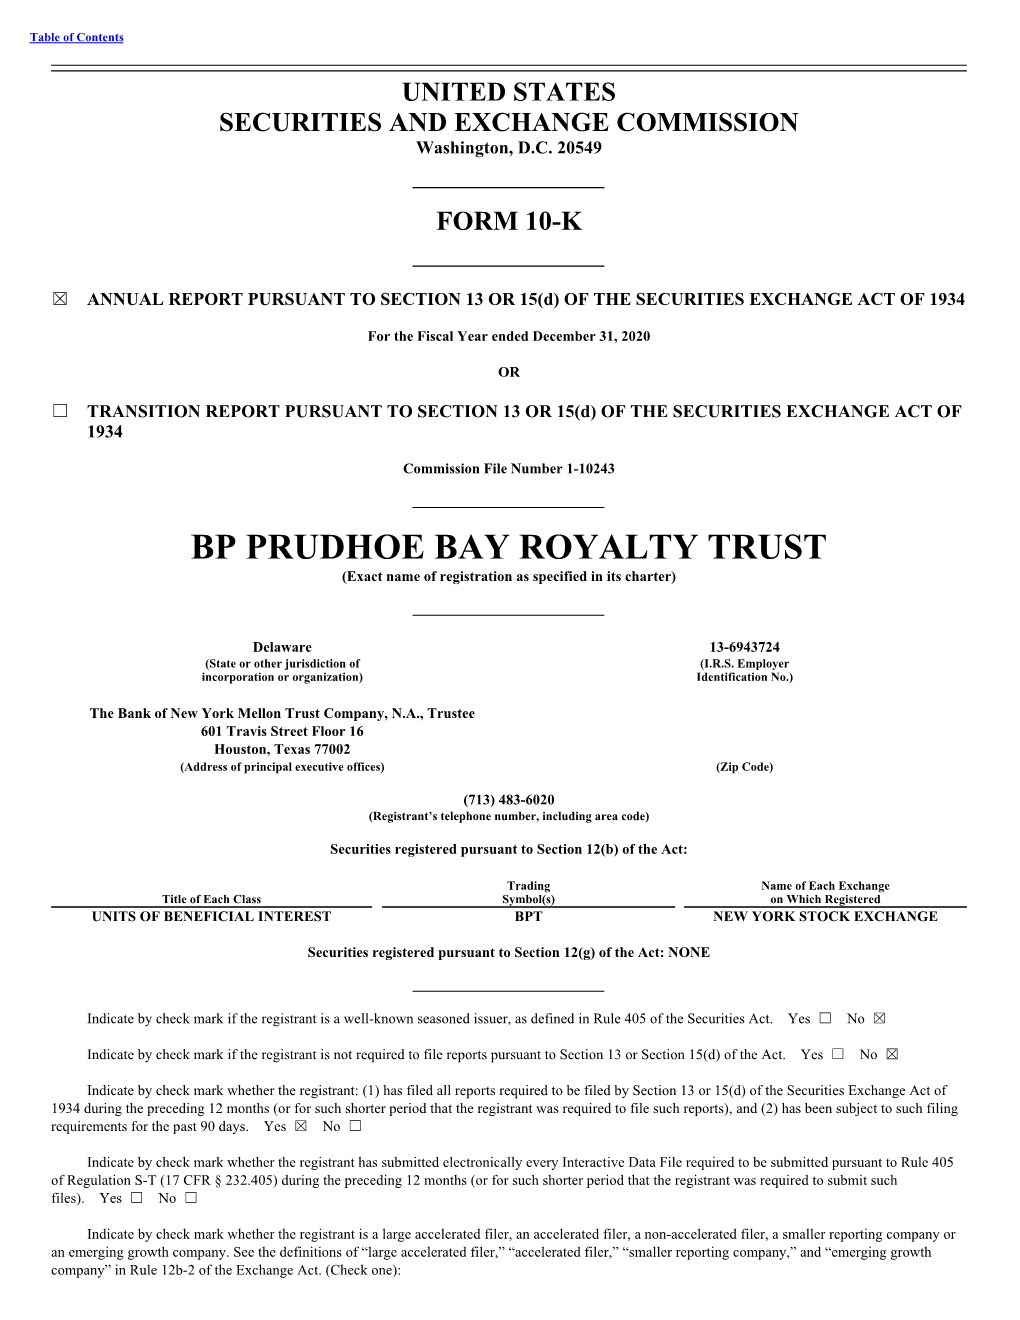 BP PRUDHOE BAY ROYALTY TRUST (Exact Name of Registration As Specified in Its Charter)